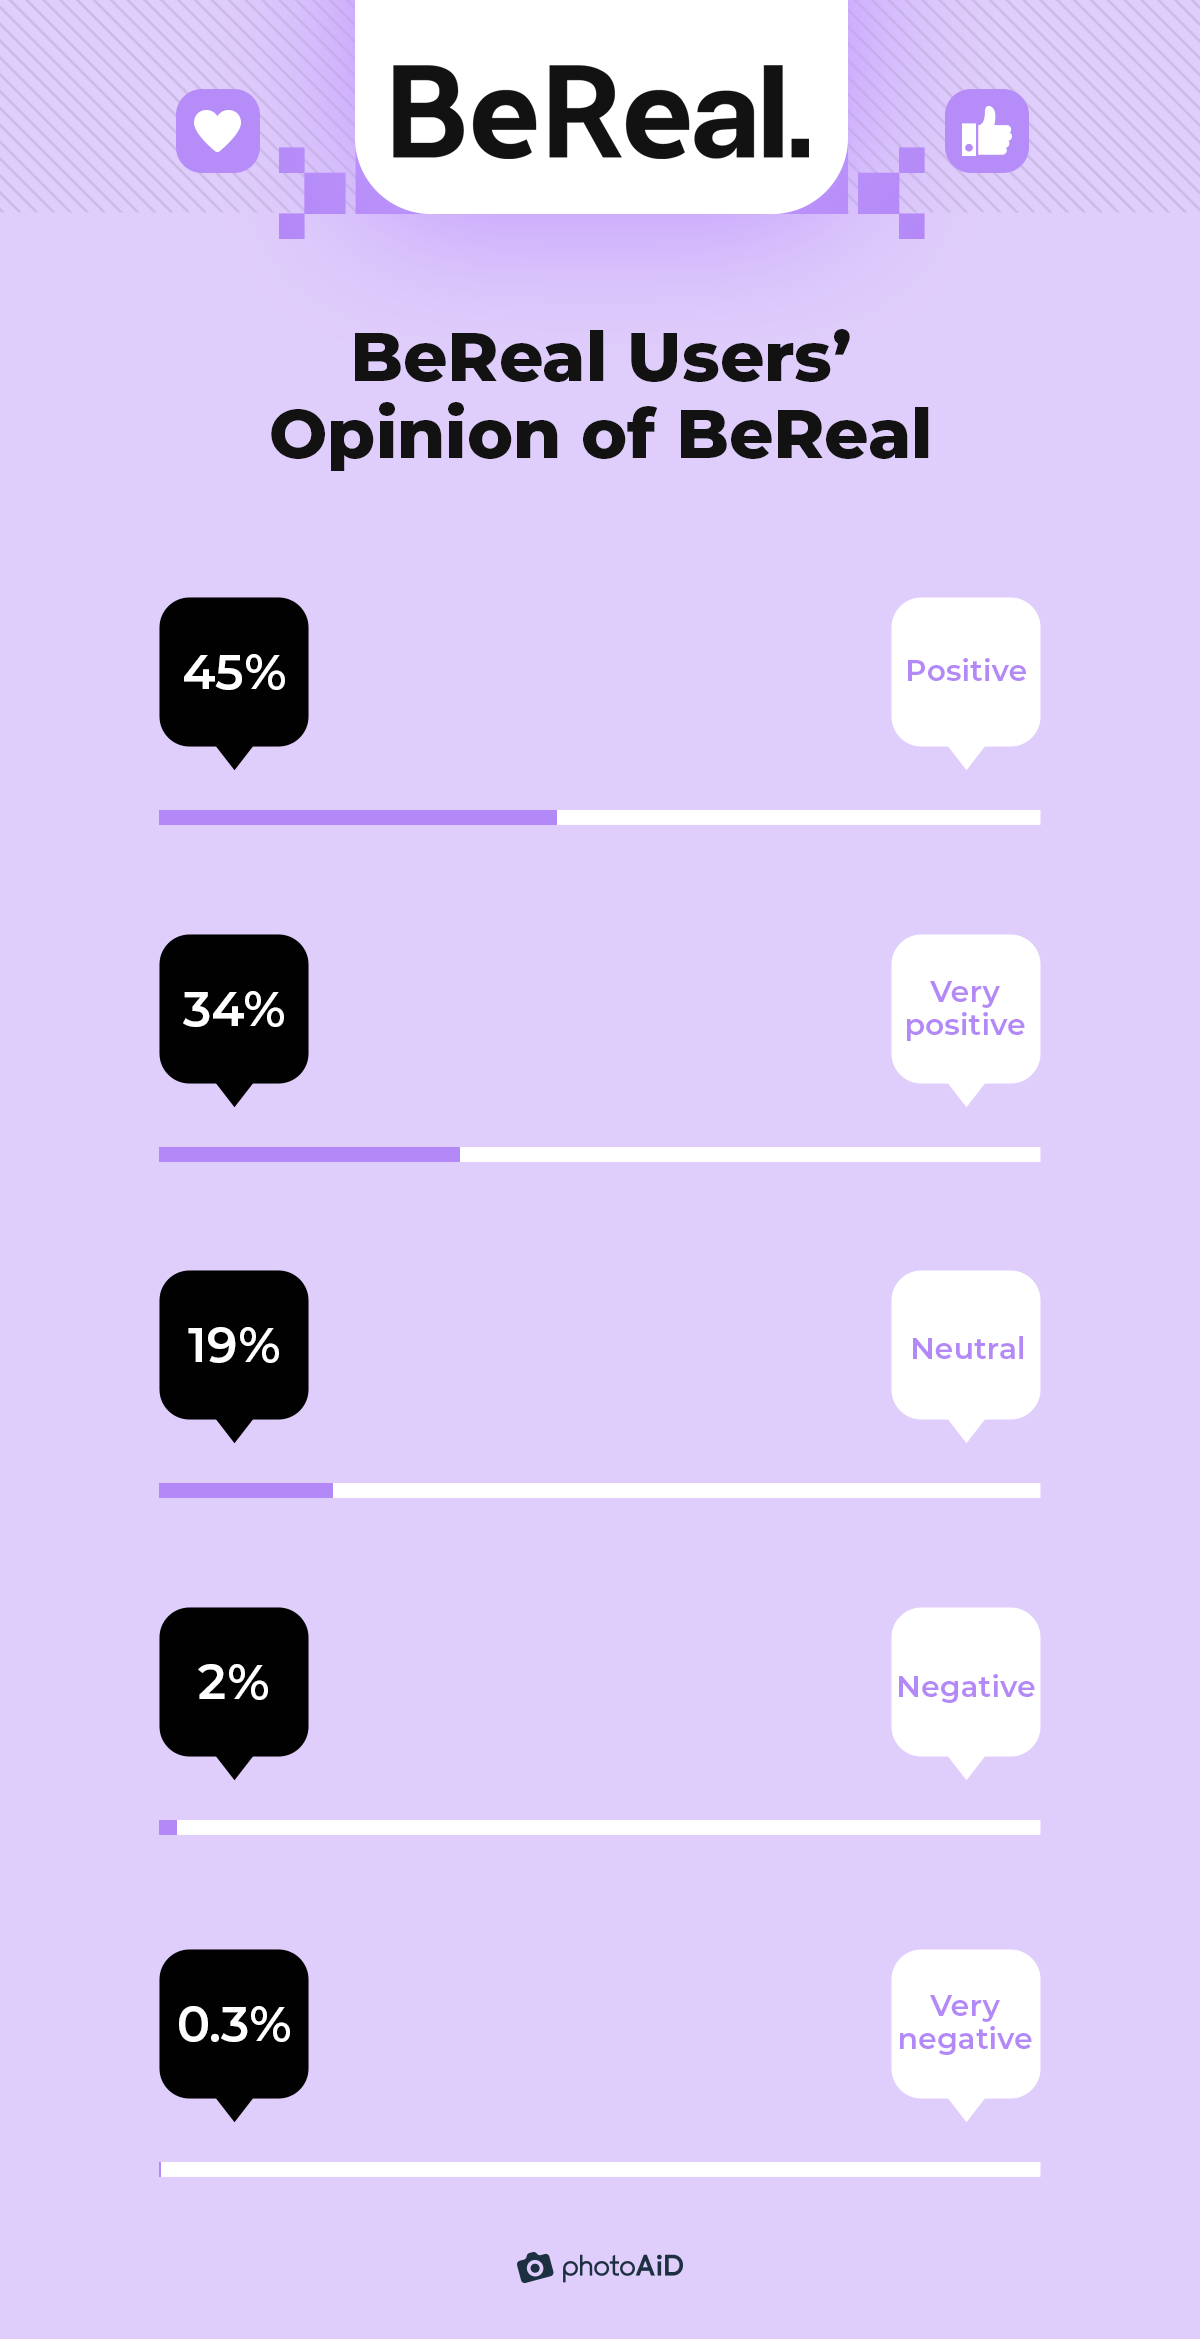 most users (79%) have a positive or very positive opinion about BeReal